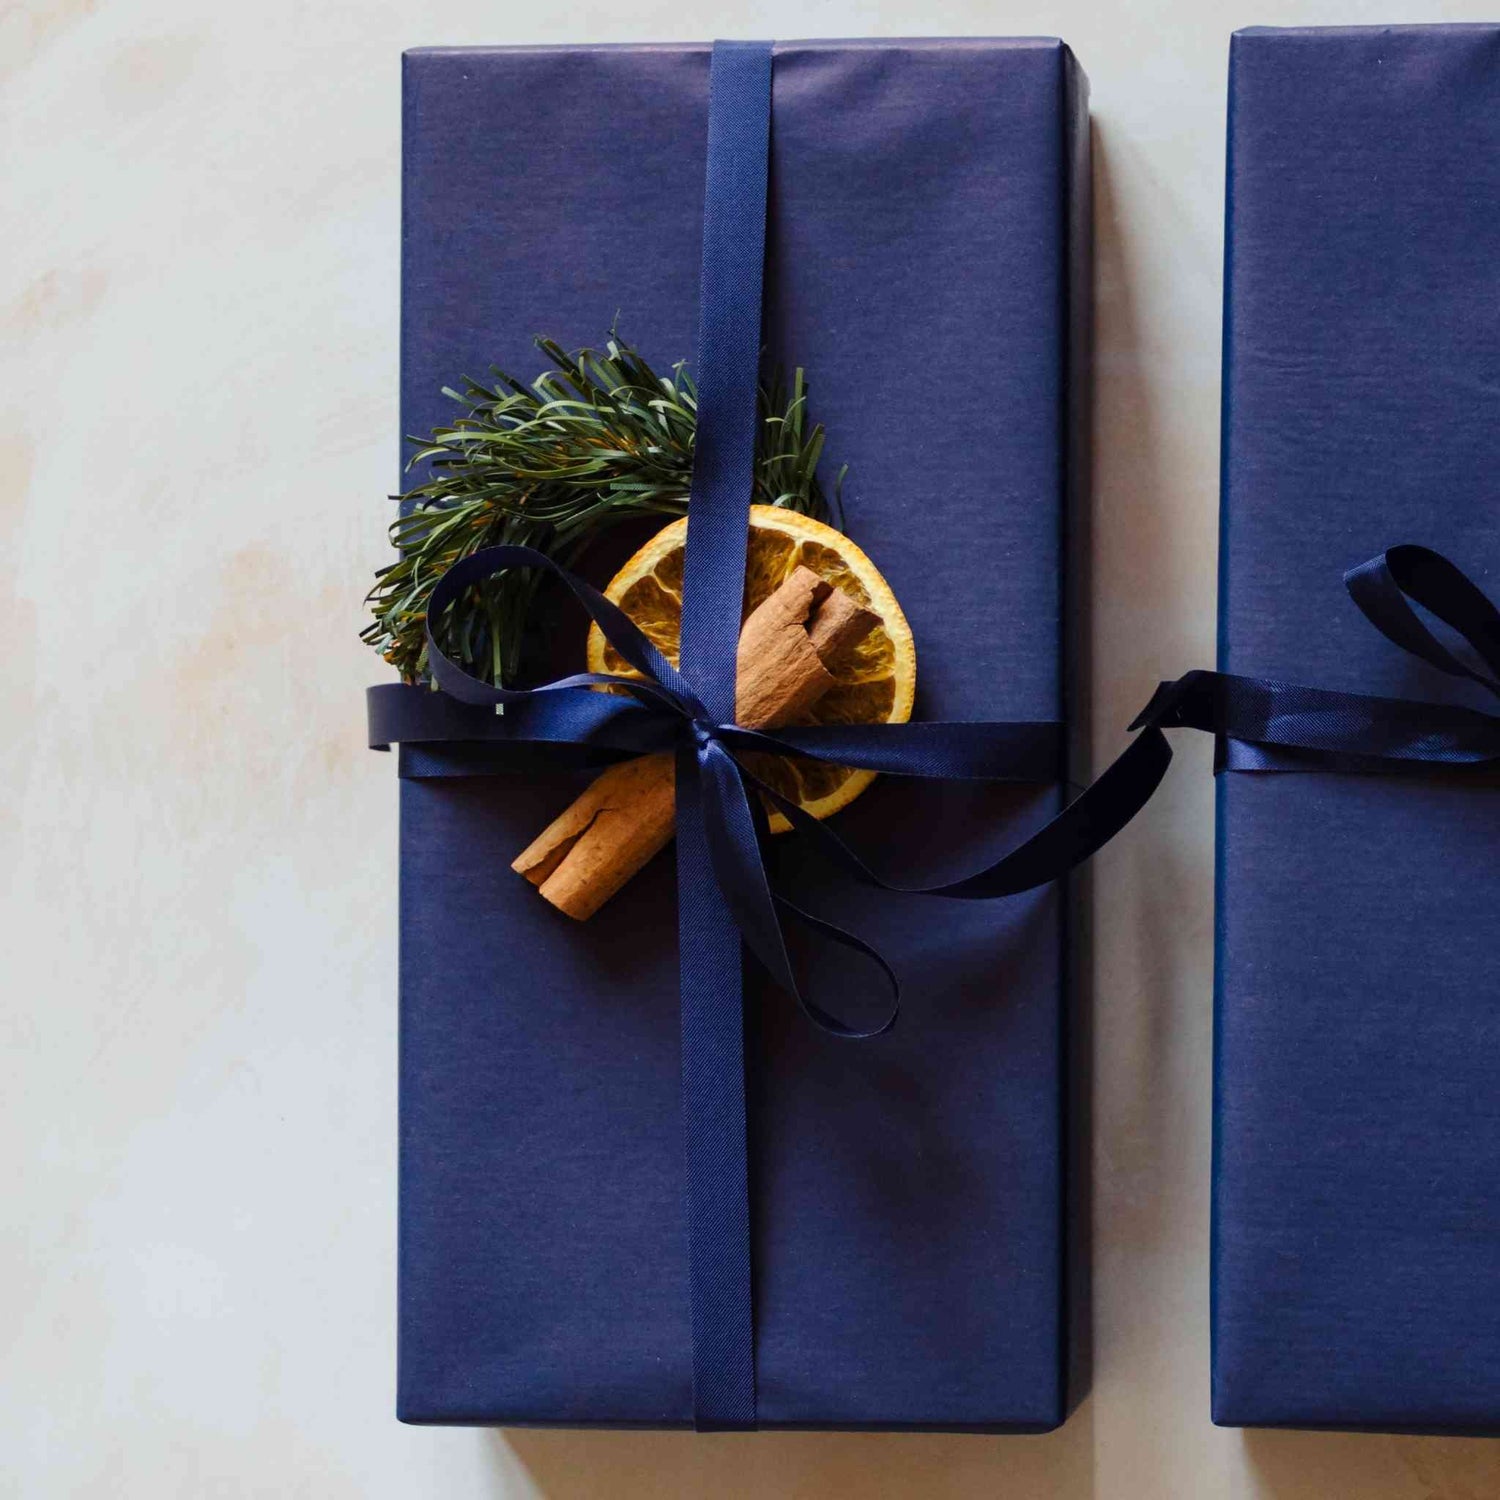 A cotton scented reed diffuser from the Home County Co. is shown with luxury Christmas Gift Wrap. The reed diffuser is wrapped in luxury navy wrapping paper secured with navy ribbon and Christmas embellishments.